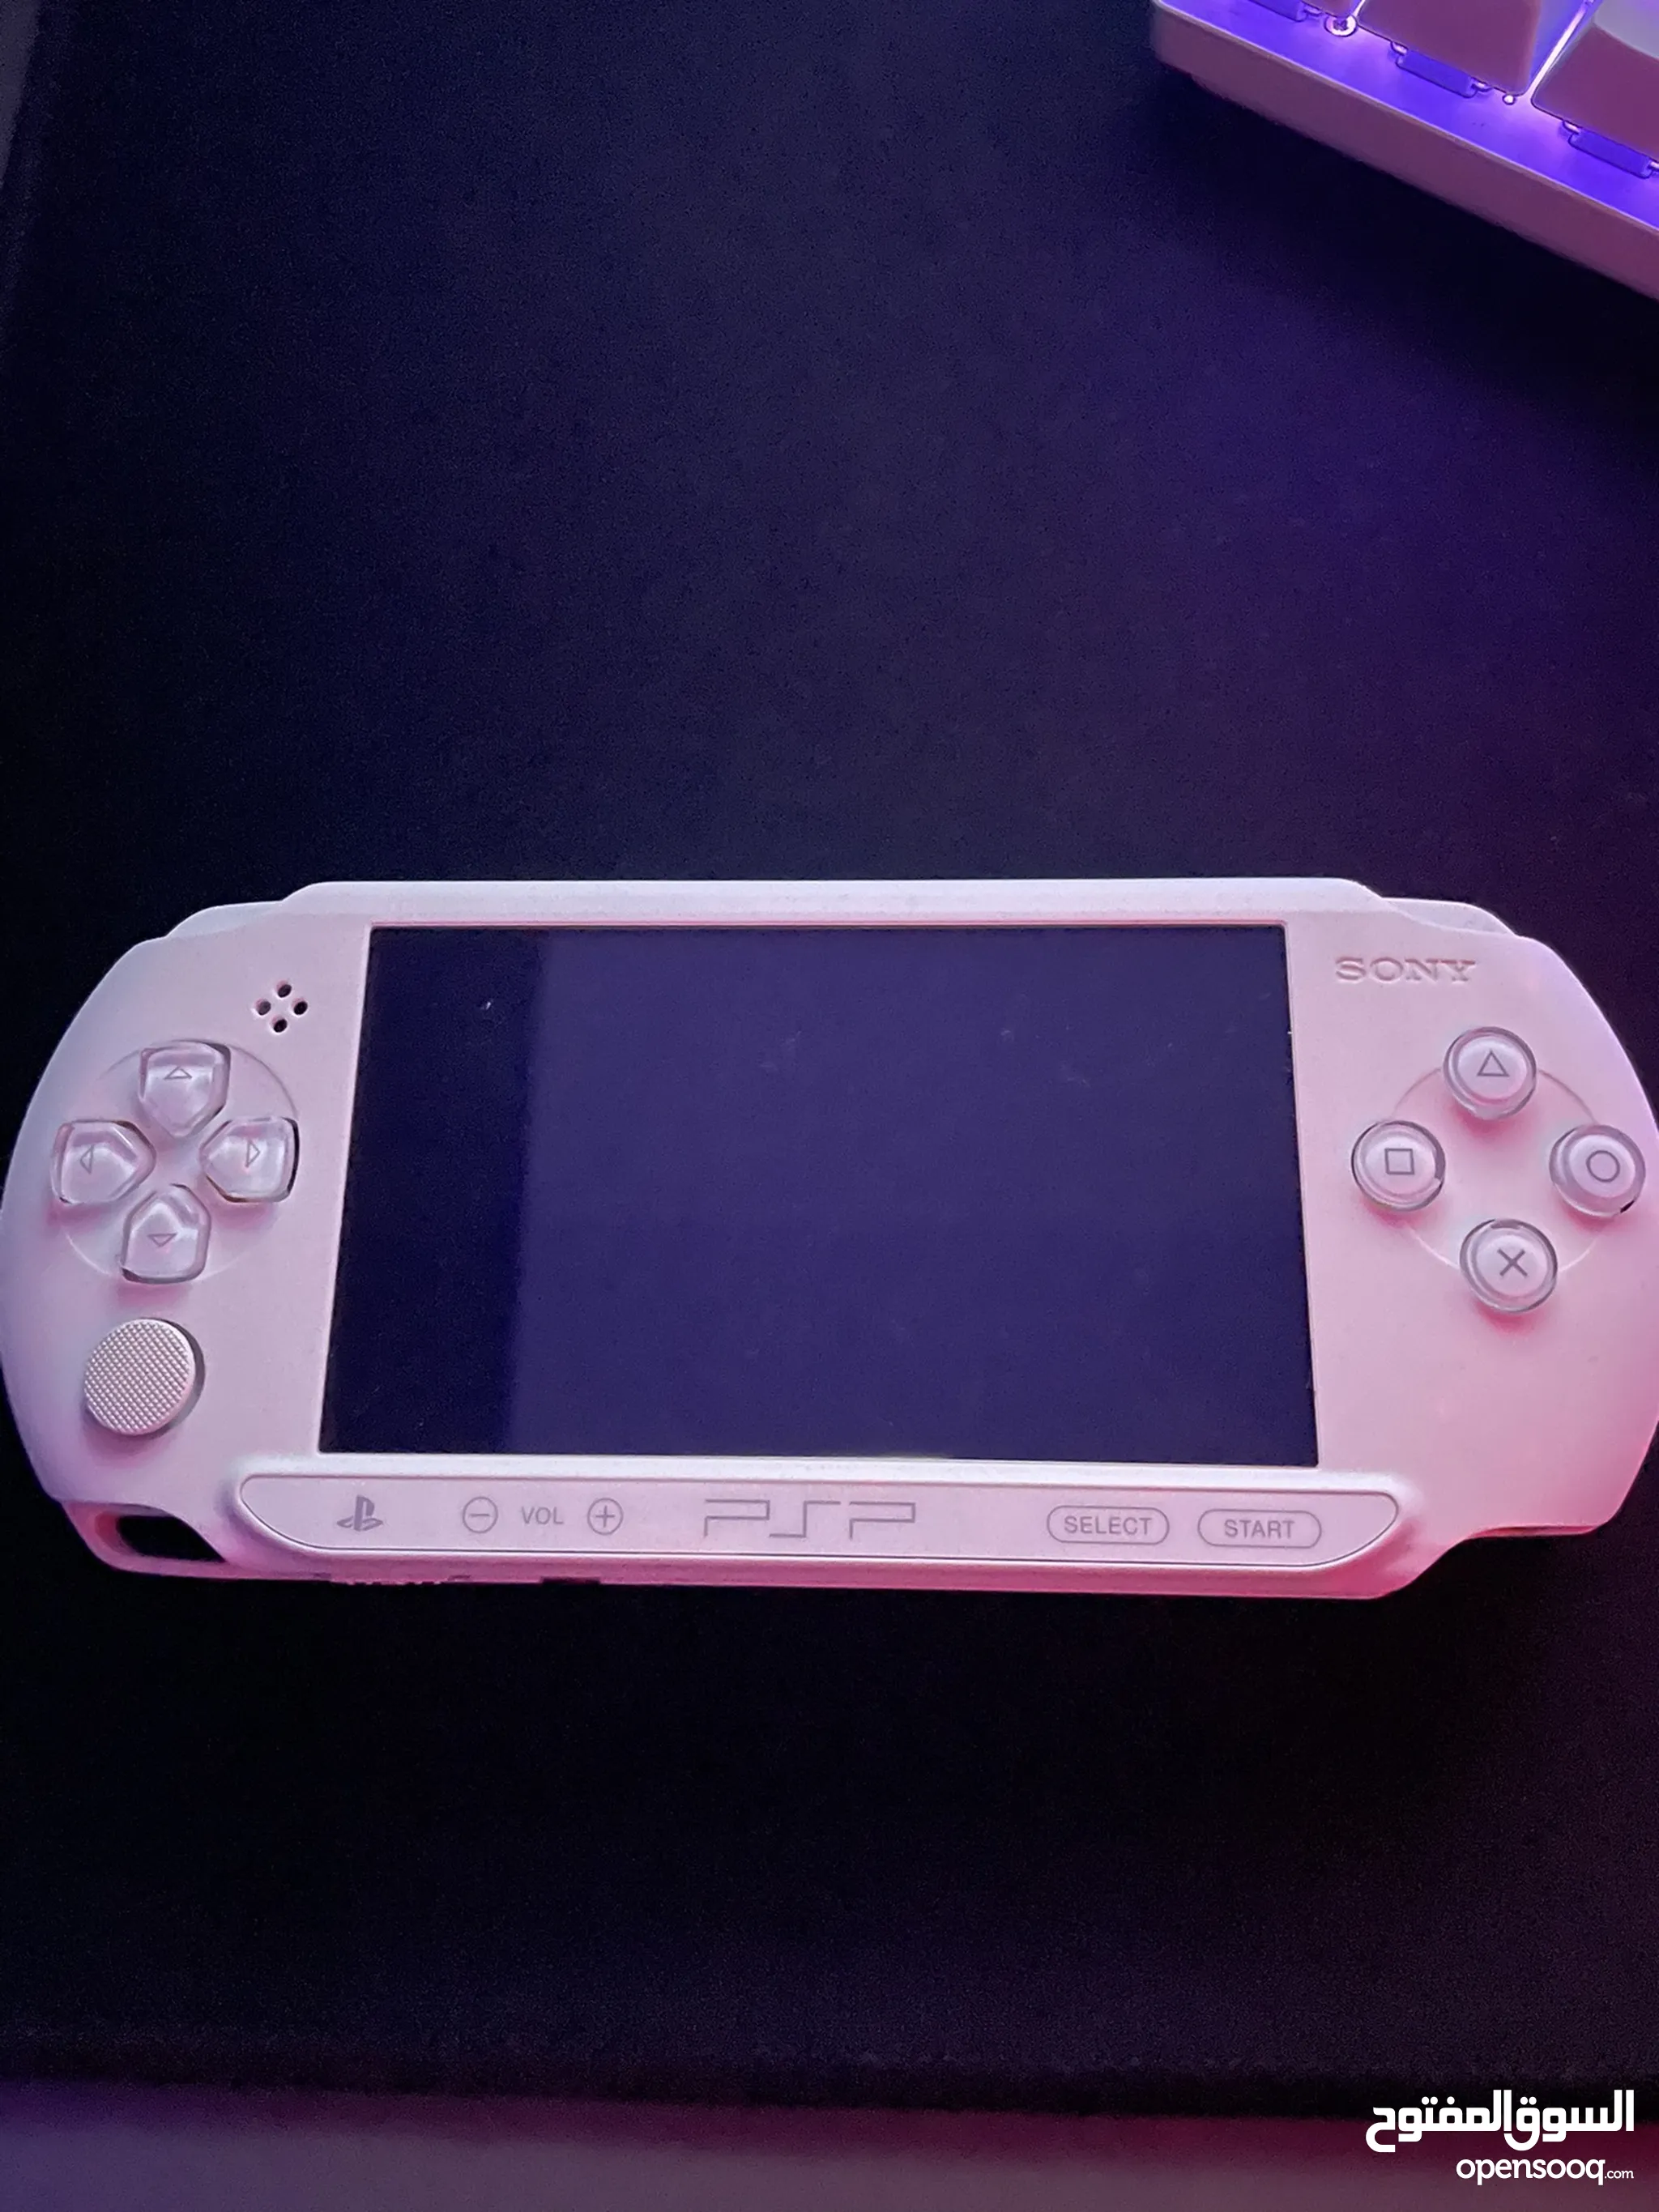 PSP - Vita For Sale in Kuwait : Used : Best Prices | OpenSooq